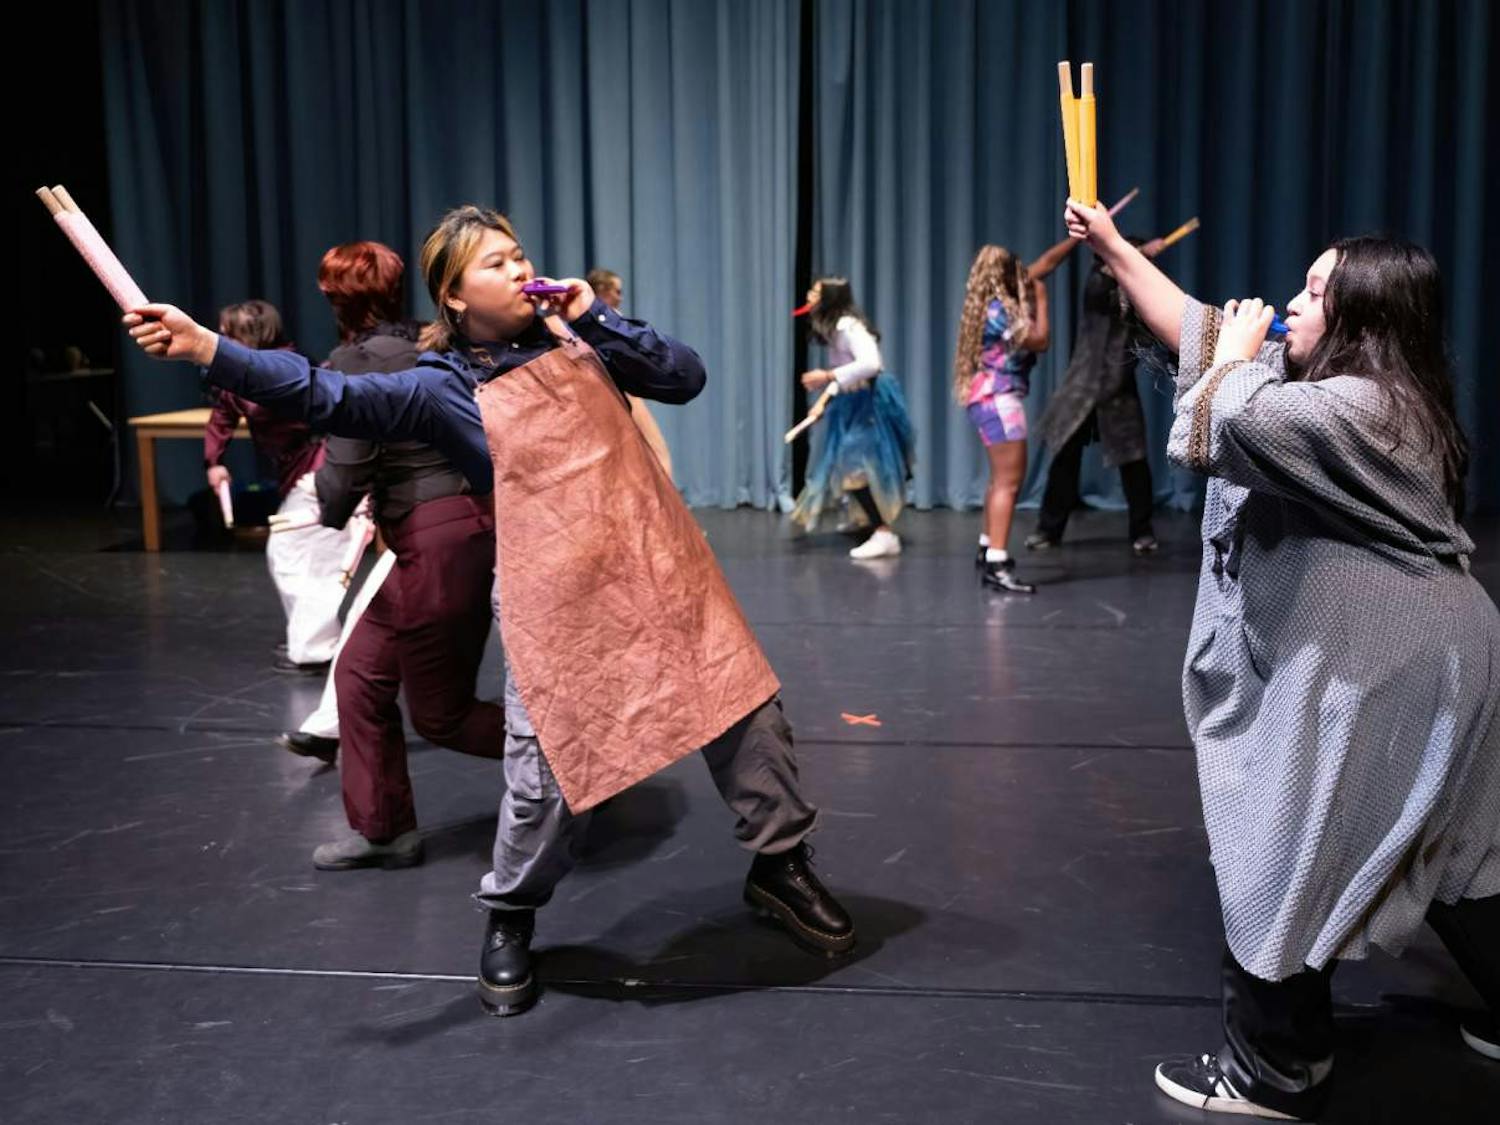 “King Henry VI: Part 2” ran this past week in the Center for the Arts rehearsal stage. The 110-minute show encompassed comedy, romance and tragedy in the bloody War of Roses | Courtesy of Ken Smith